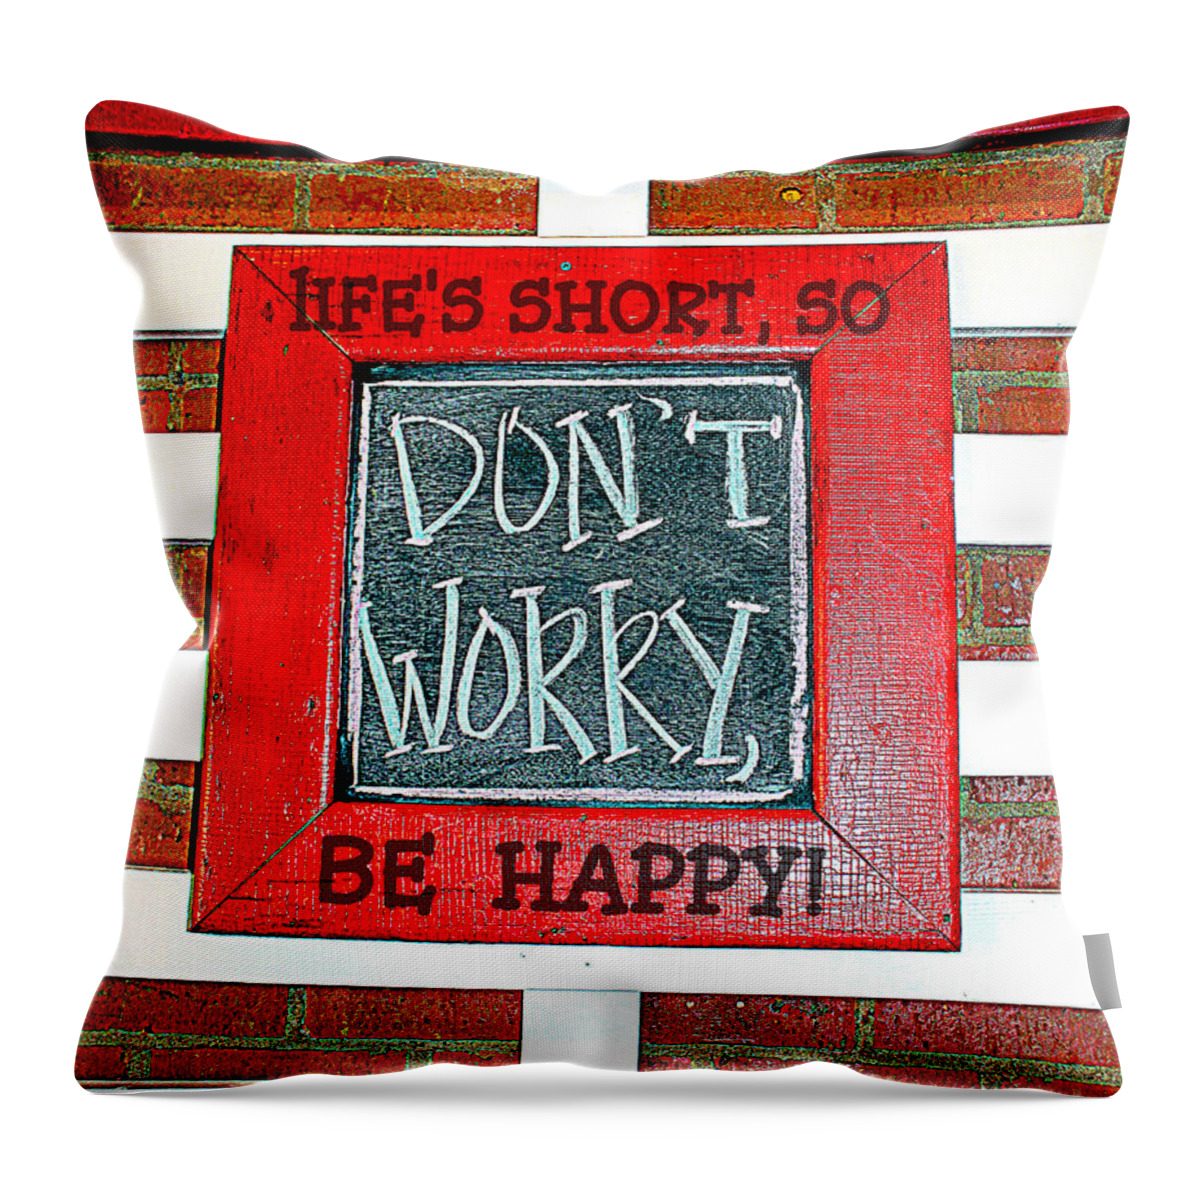 Don't Worry Be Happy Quote Throw Pillow featuring the photograph Life's Short So Don't Worry Be Happy by Kathy White